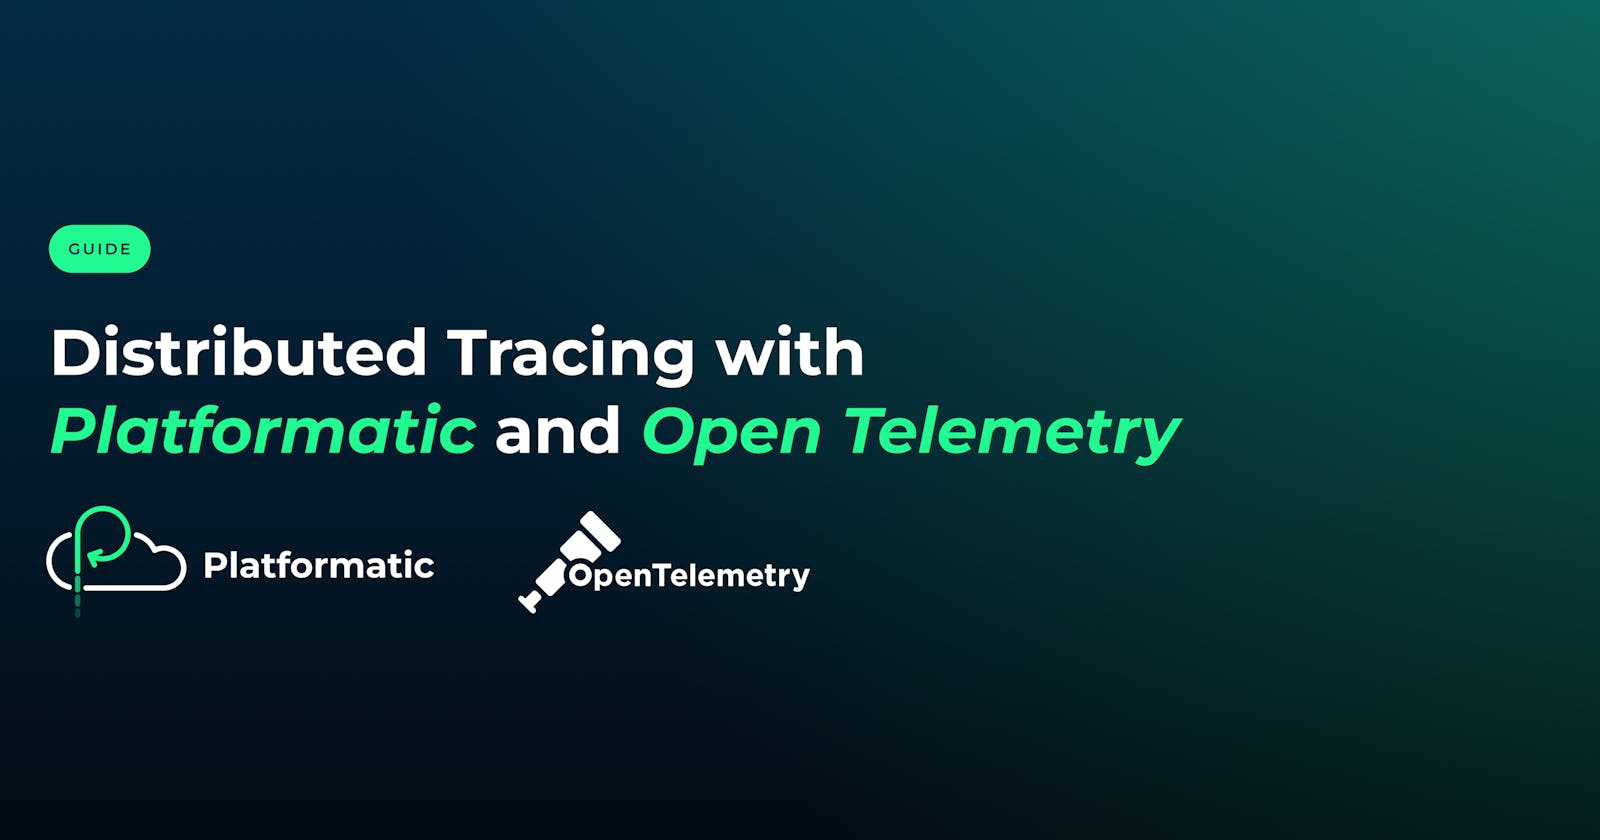 Distributed Tracing with Platformatic and Open Telemetry